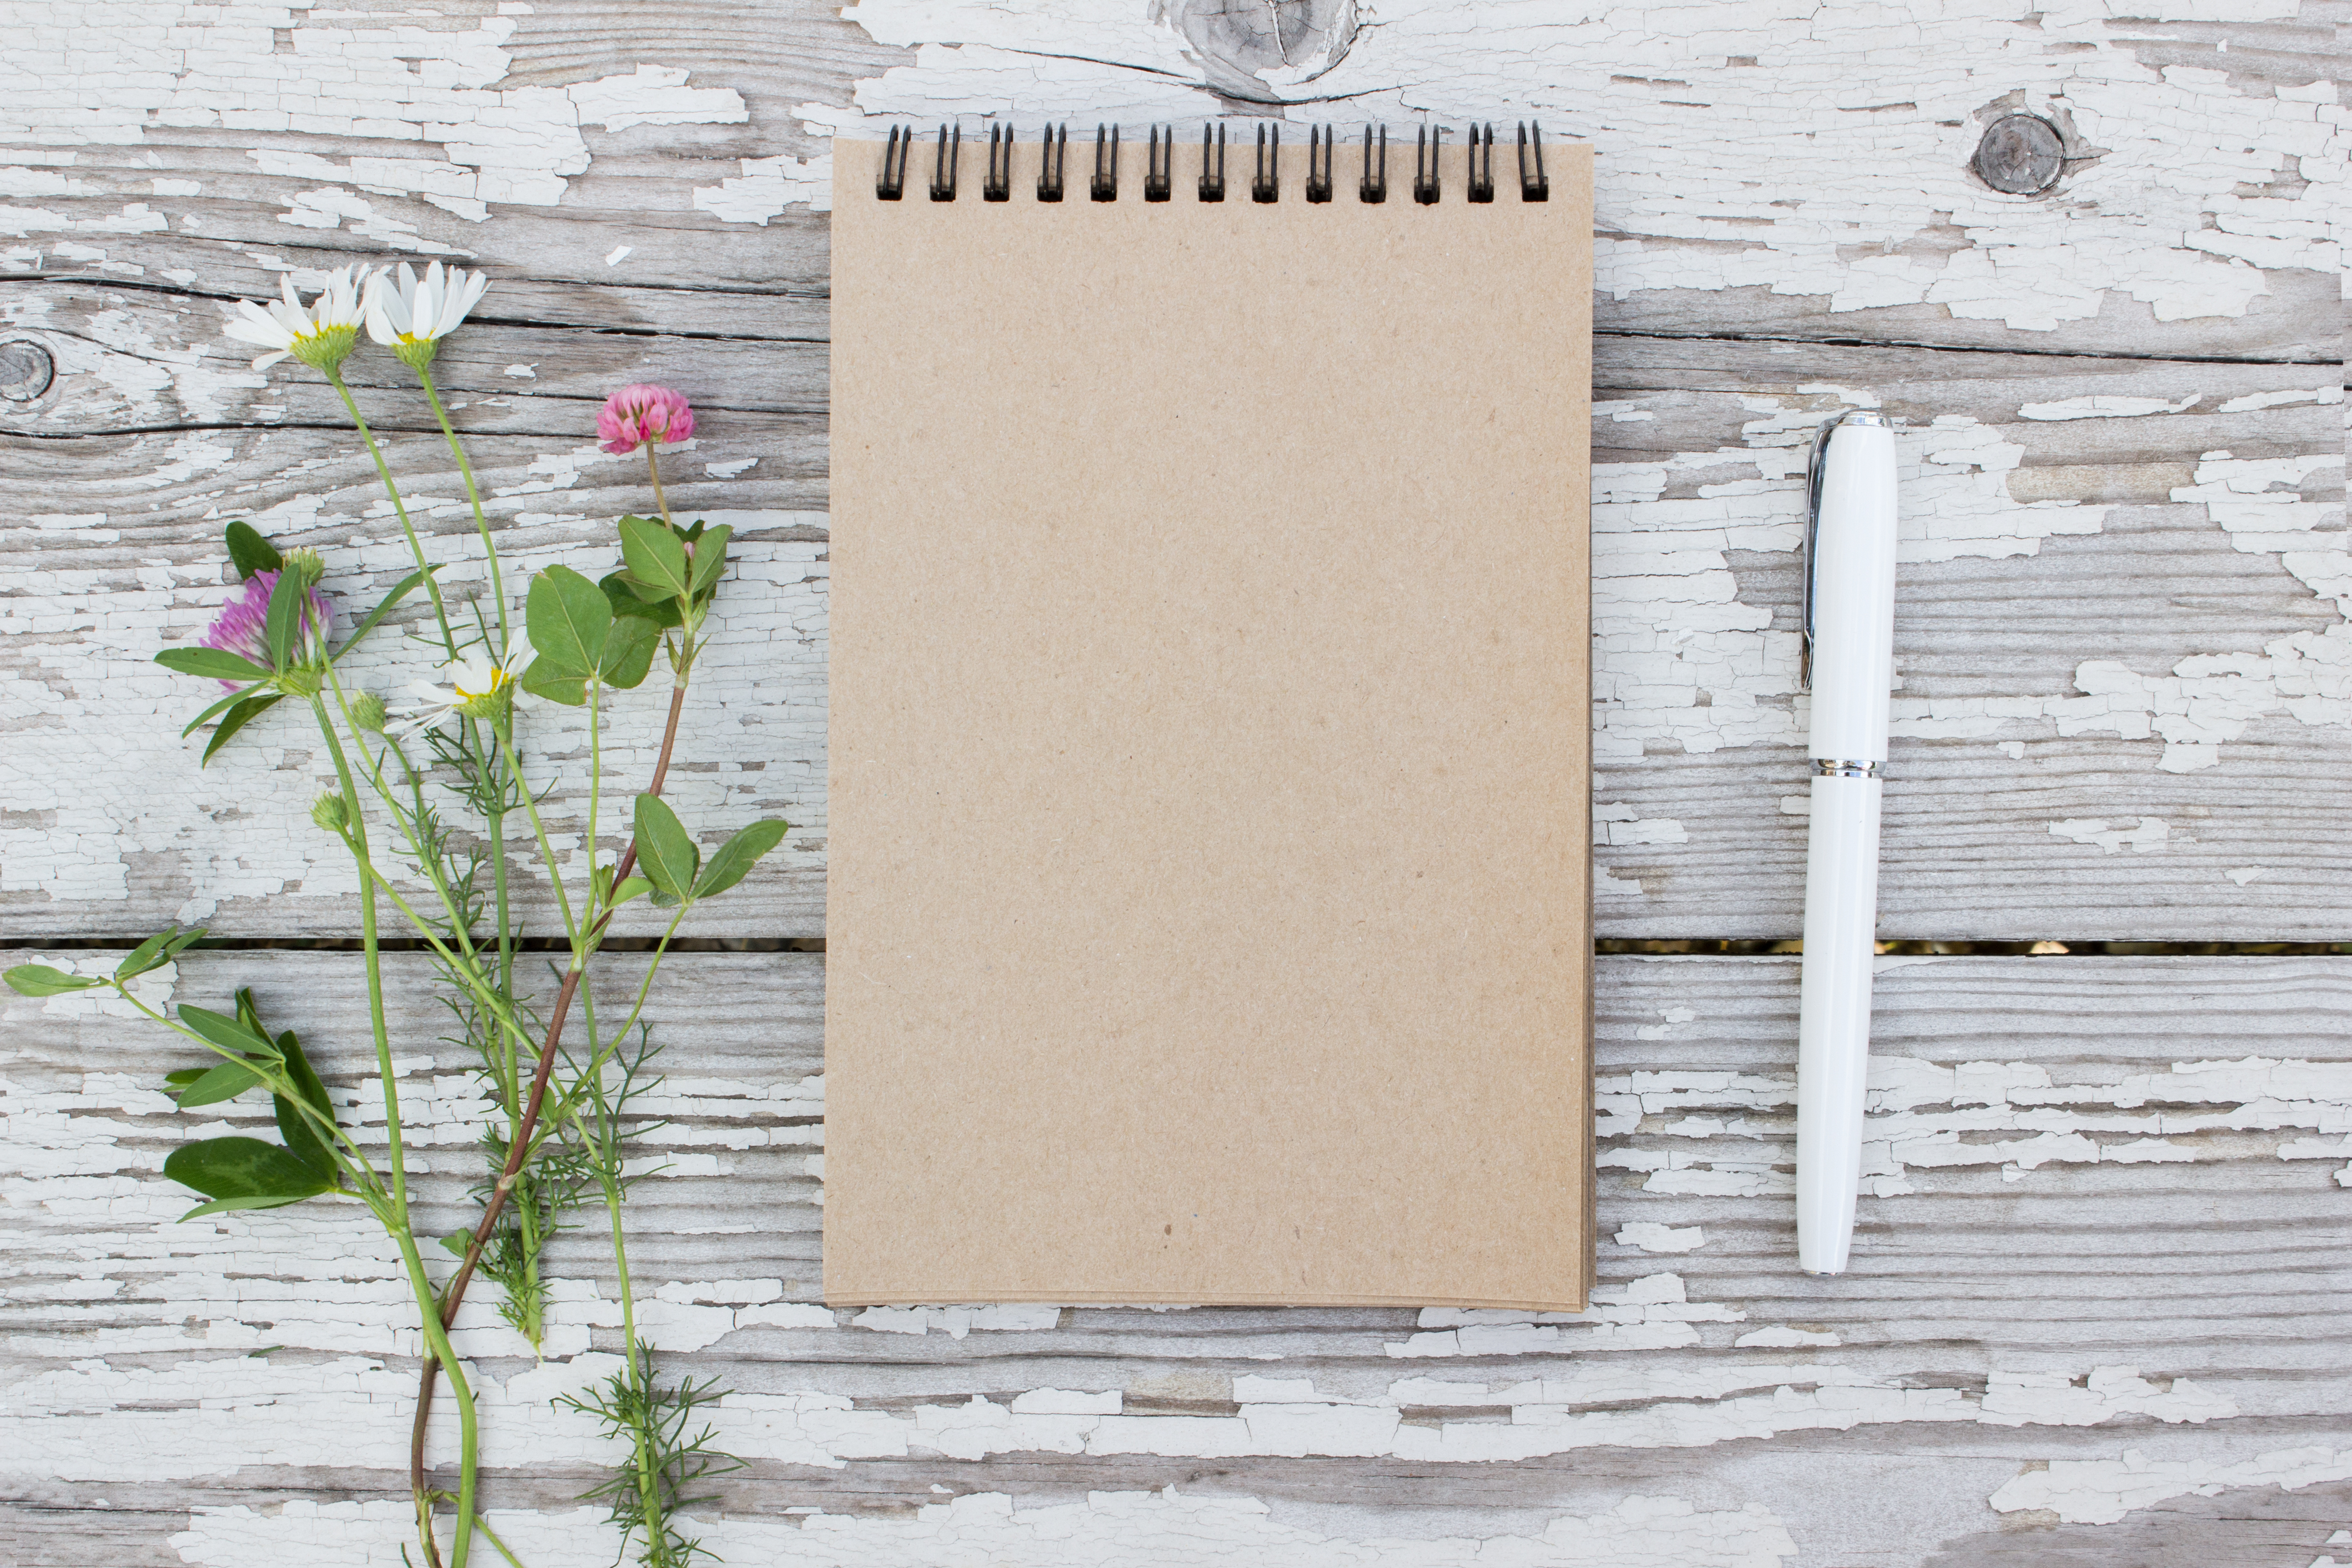 Kraft paper spiral notebook, white pen and summer flowers on rustic wooden table.